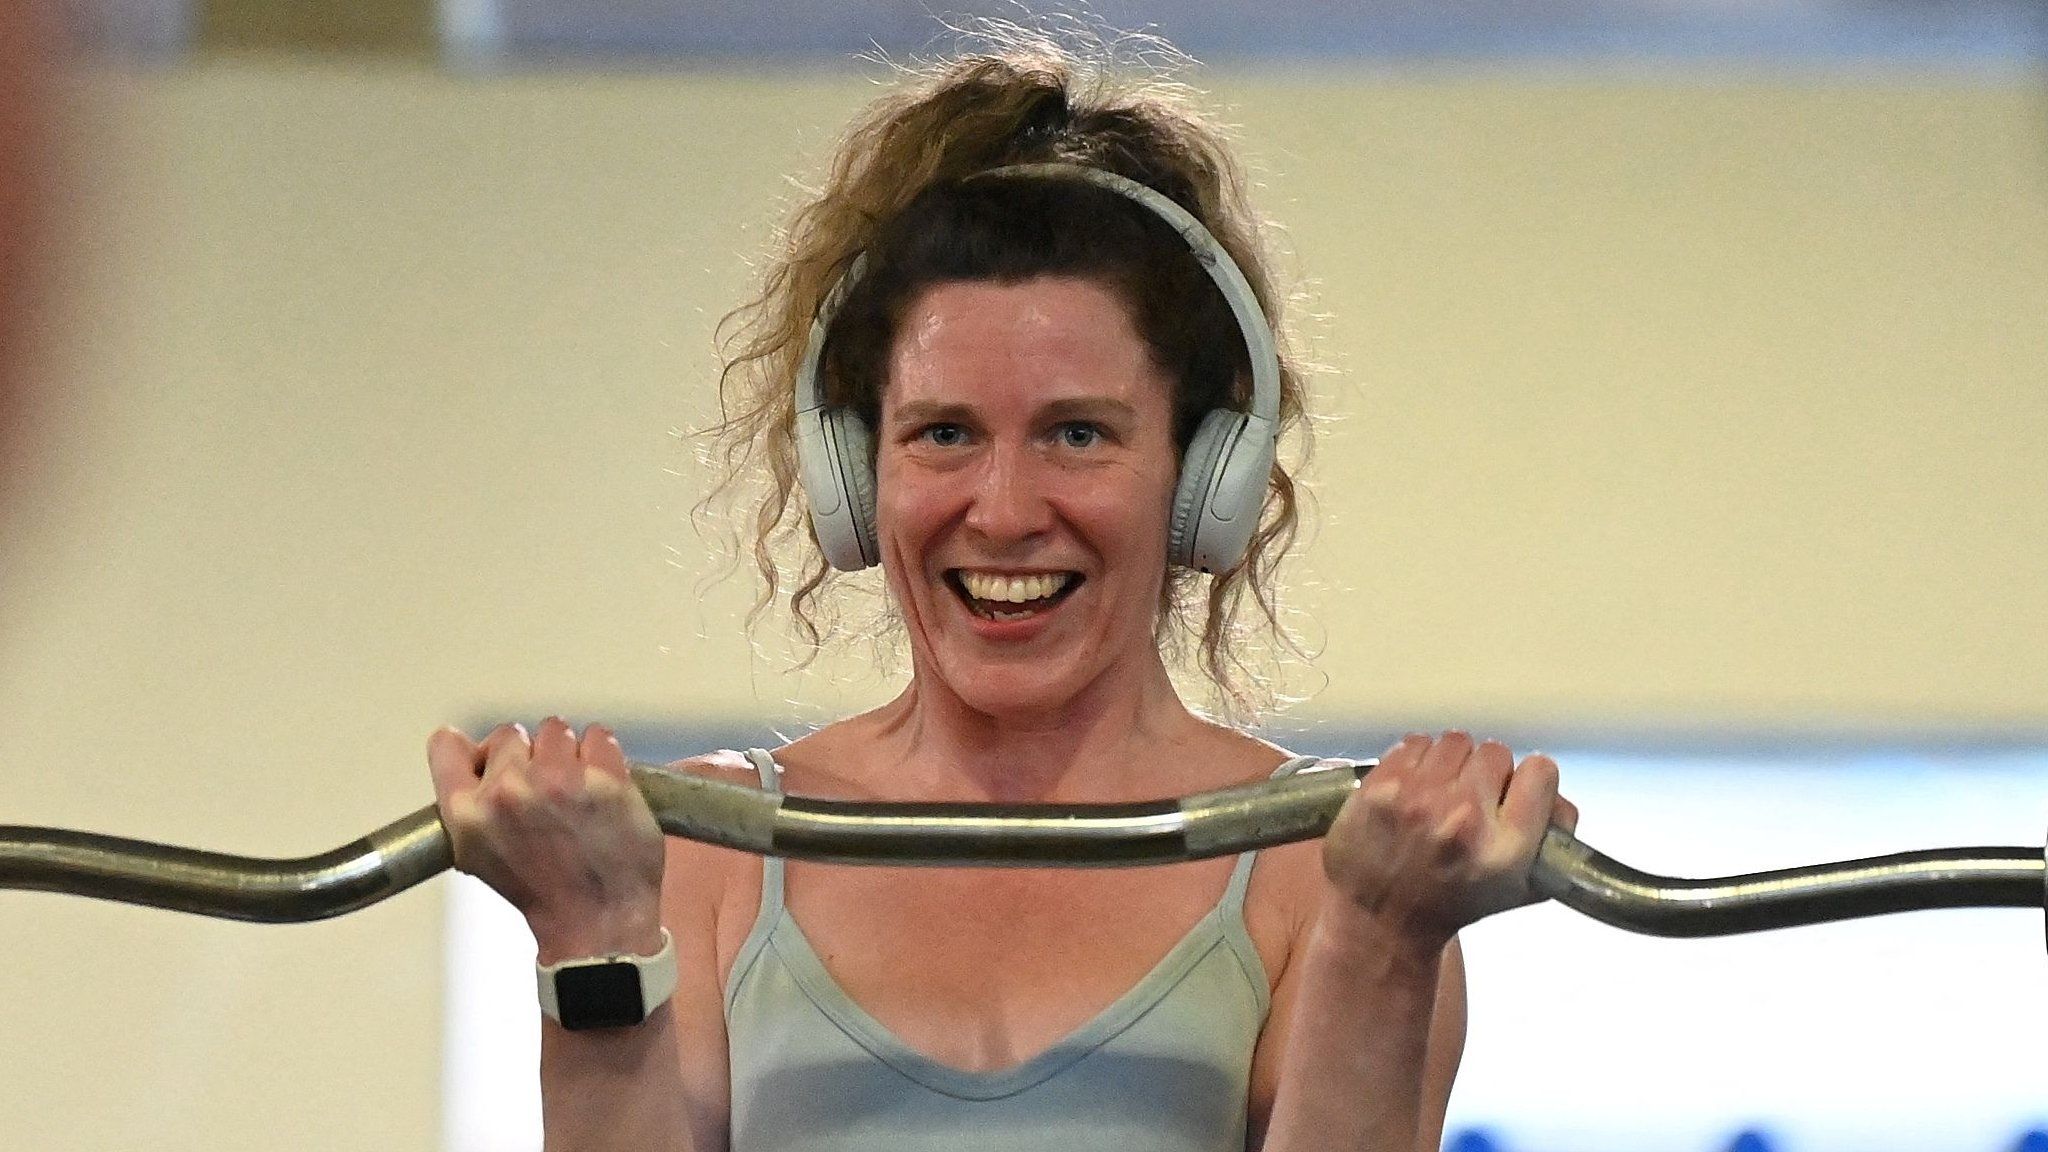 A woman lifts a weight whilst smiling at herself in the mirror